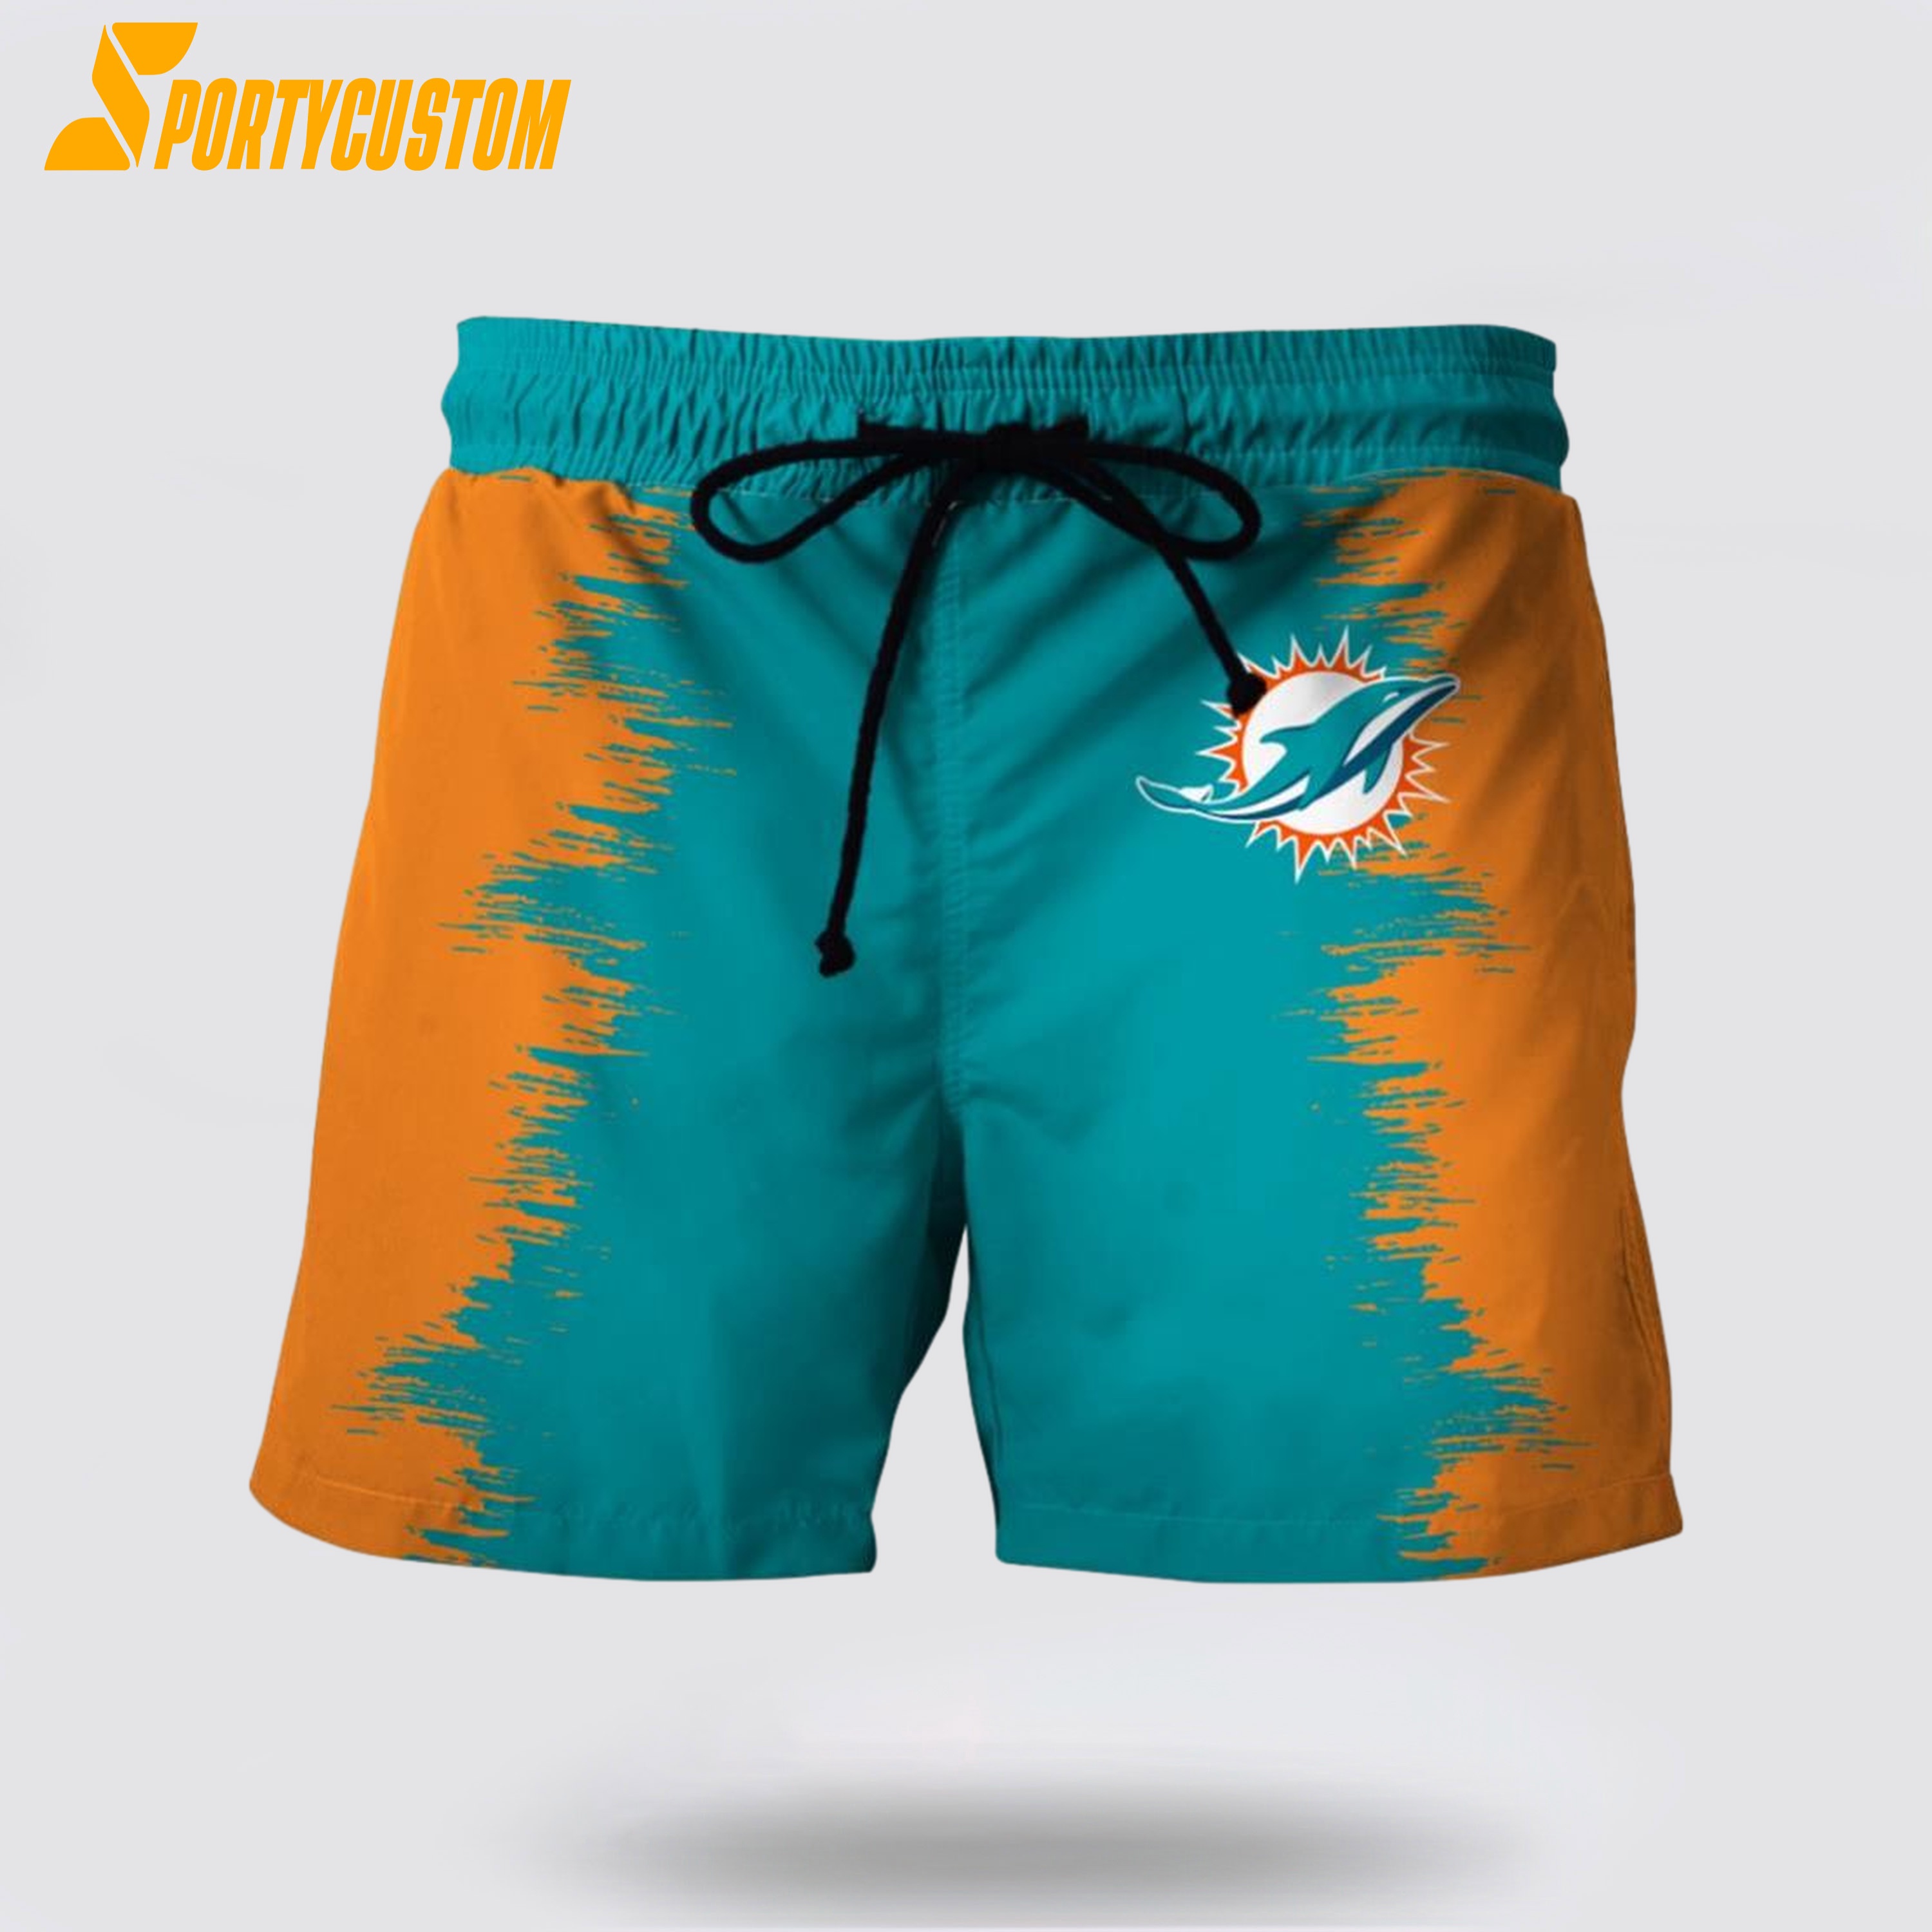 Miami Dolphins Shop - Miami Dolphins Mens Nfl Beach Board Shorts Summer Gift For Fans